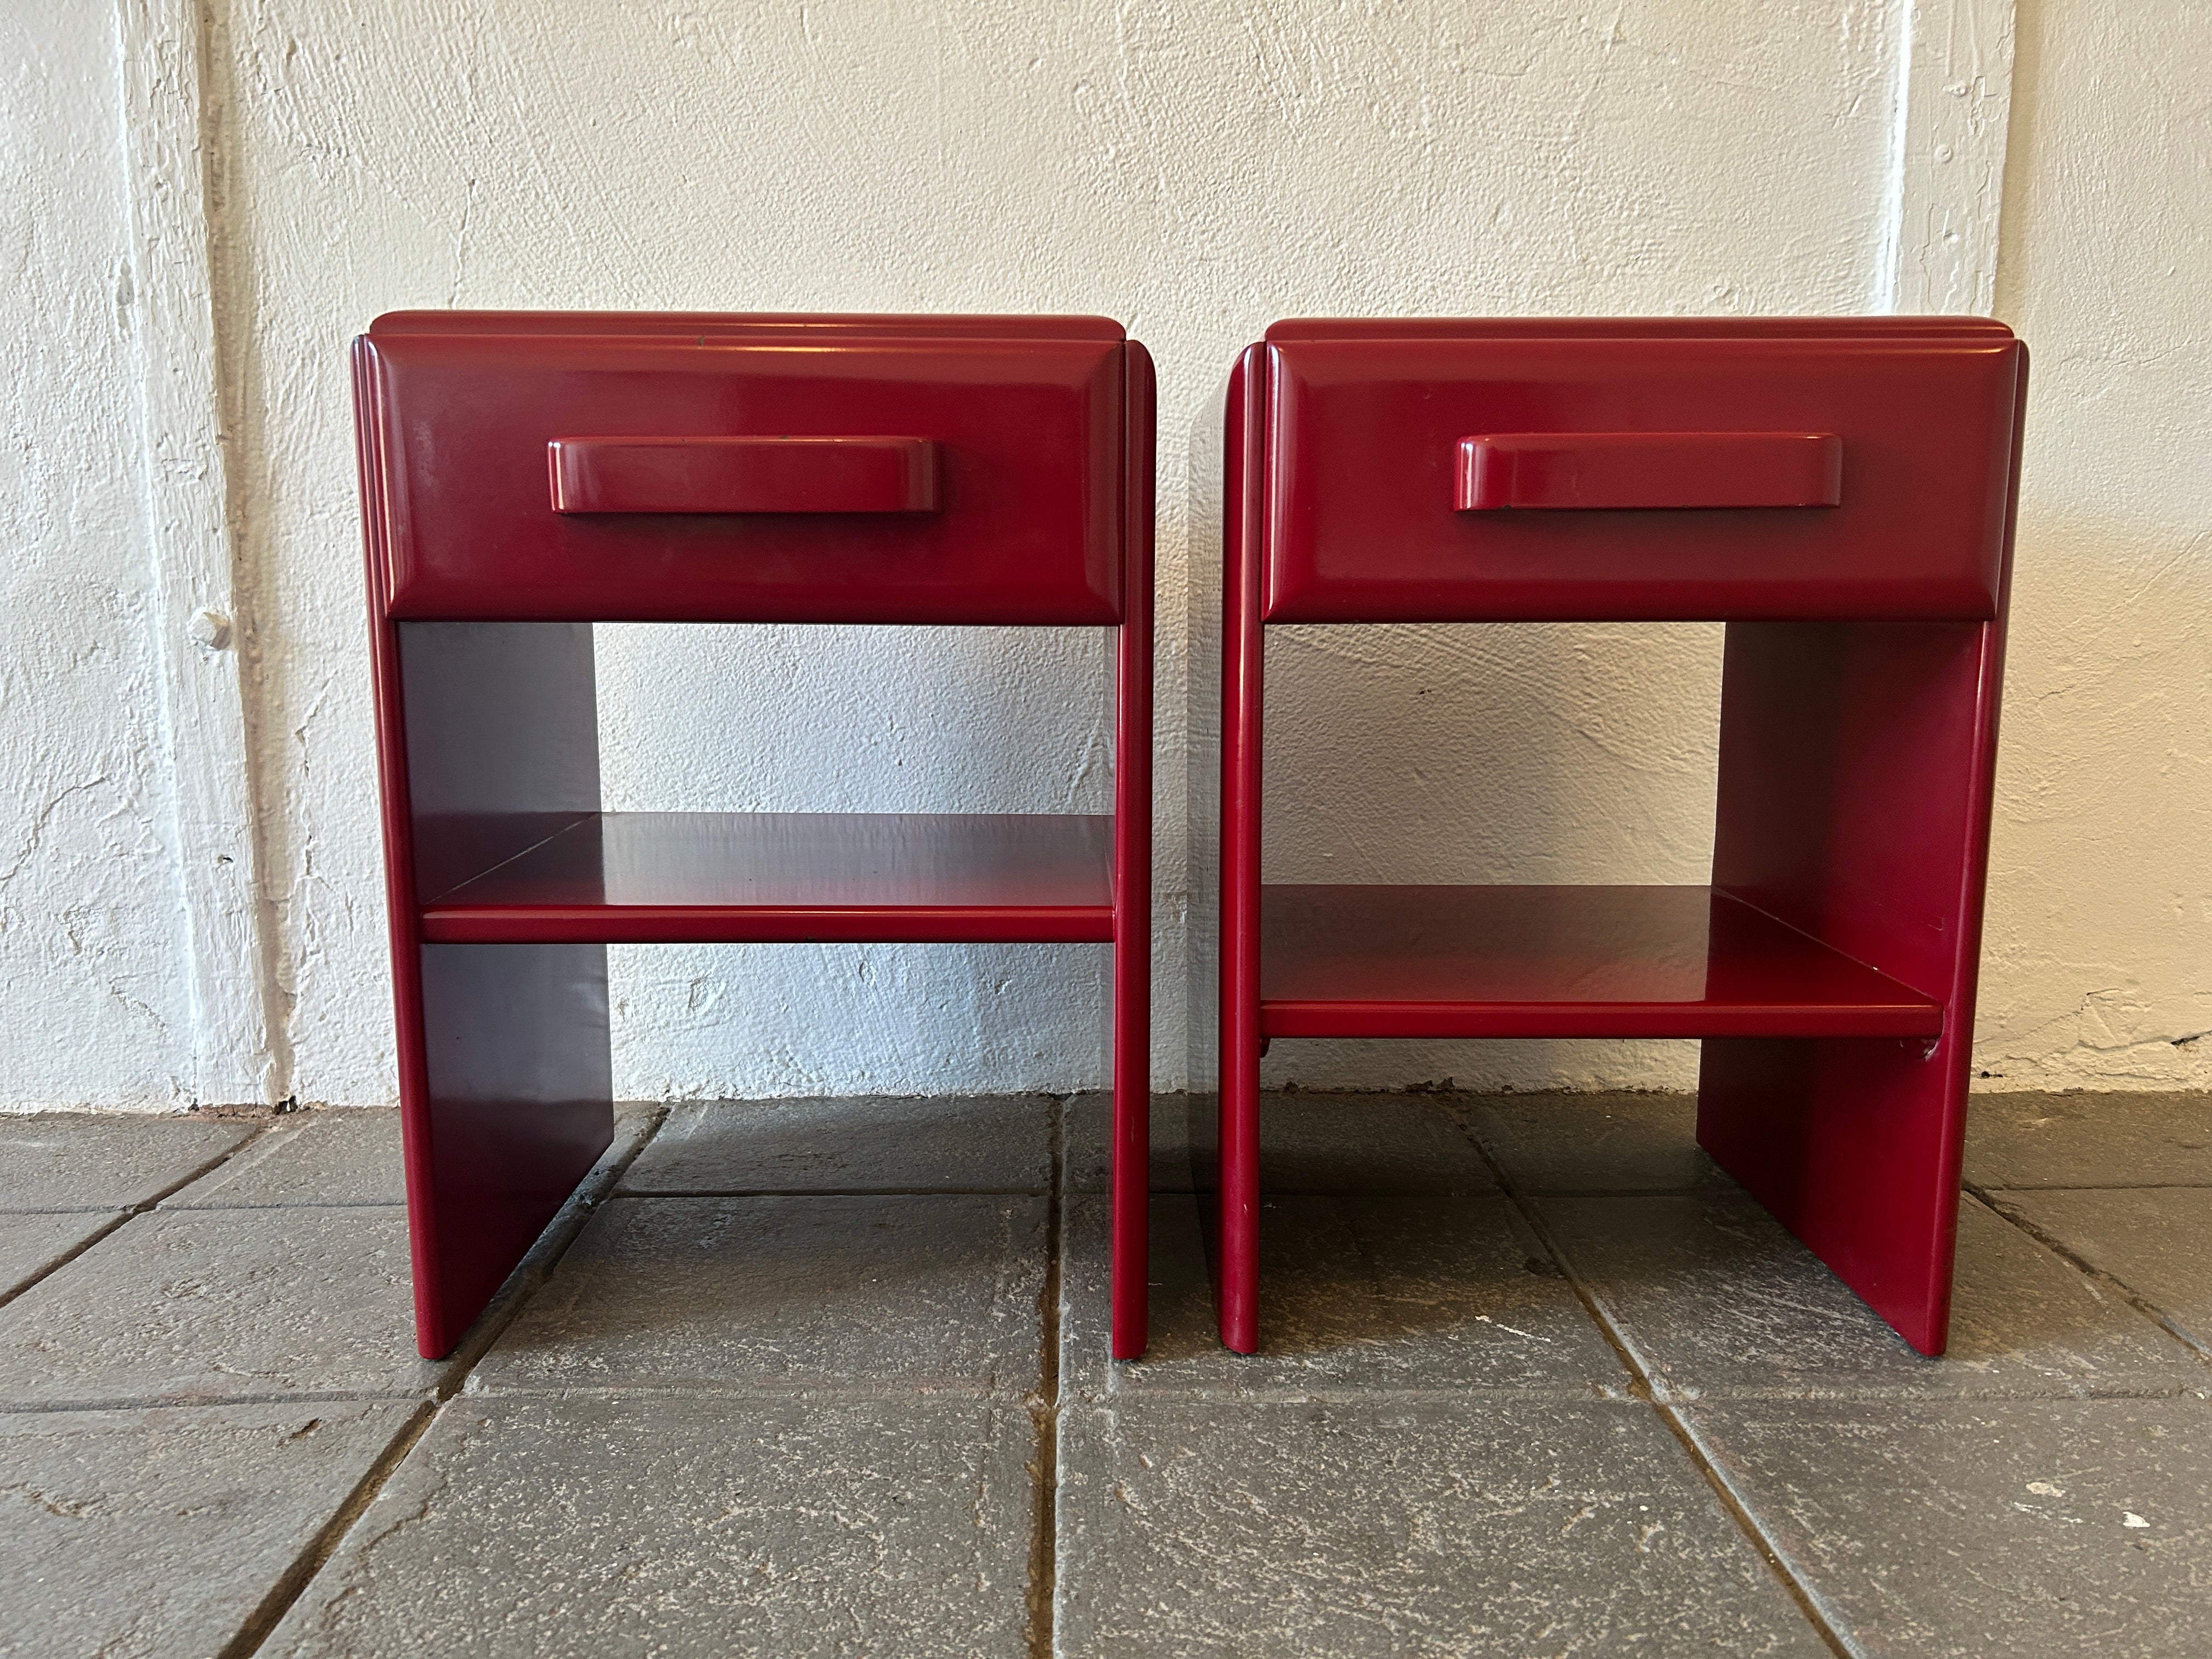 Pair of Mid-Century Modern design Russel Wright Dark Red lacquer Single drawer nightstands. Made from solid maple. Designed by the famous architect Russel Wright. In original condition showing normal wear from use. Labeled inside drawers. One lower